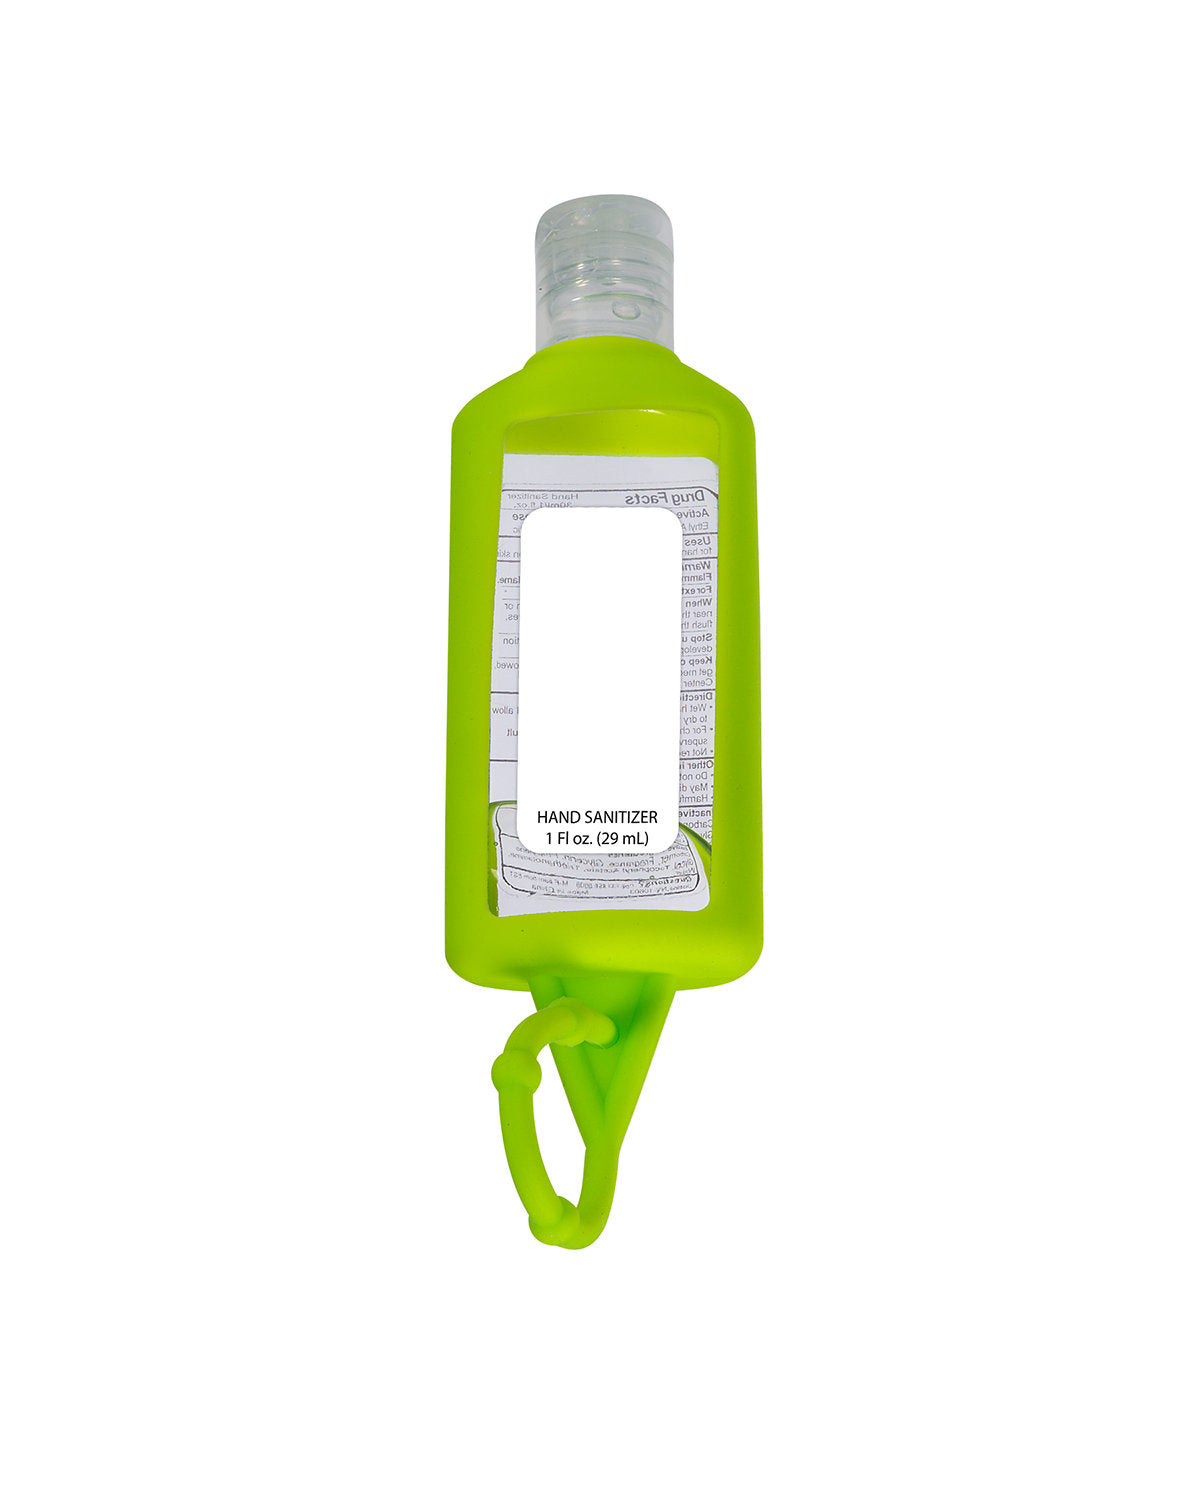 Hand Sanitizer With Silicone Holder